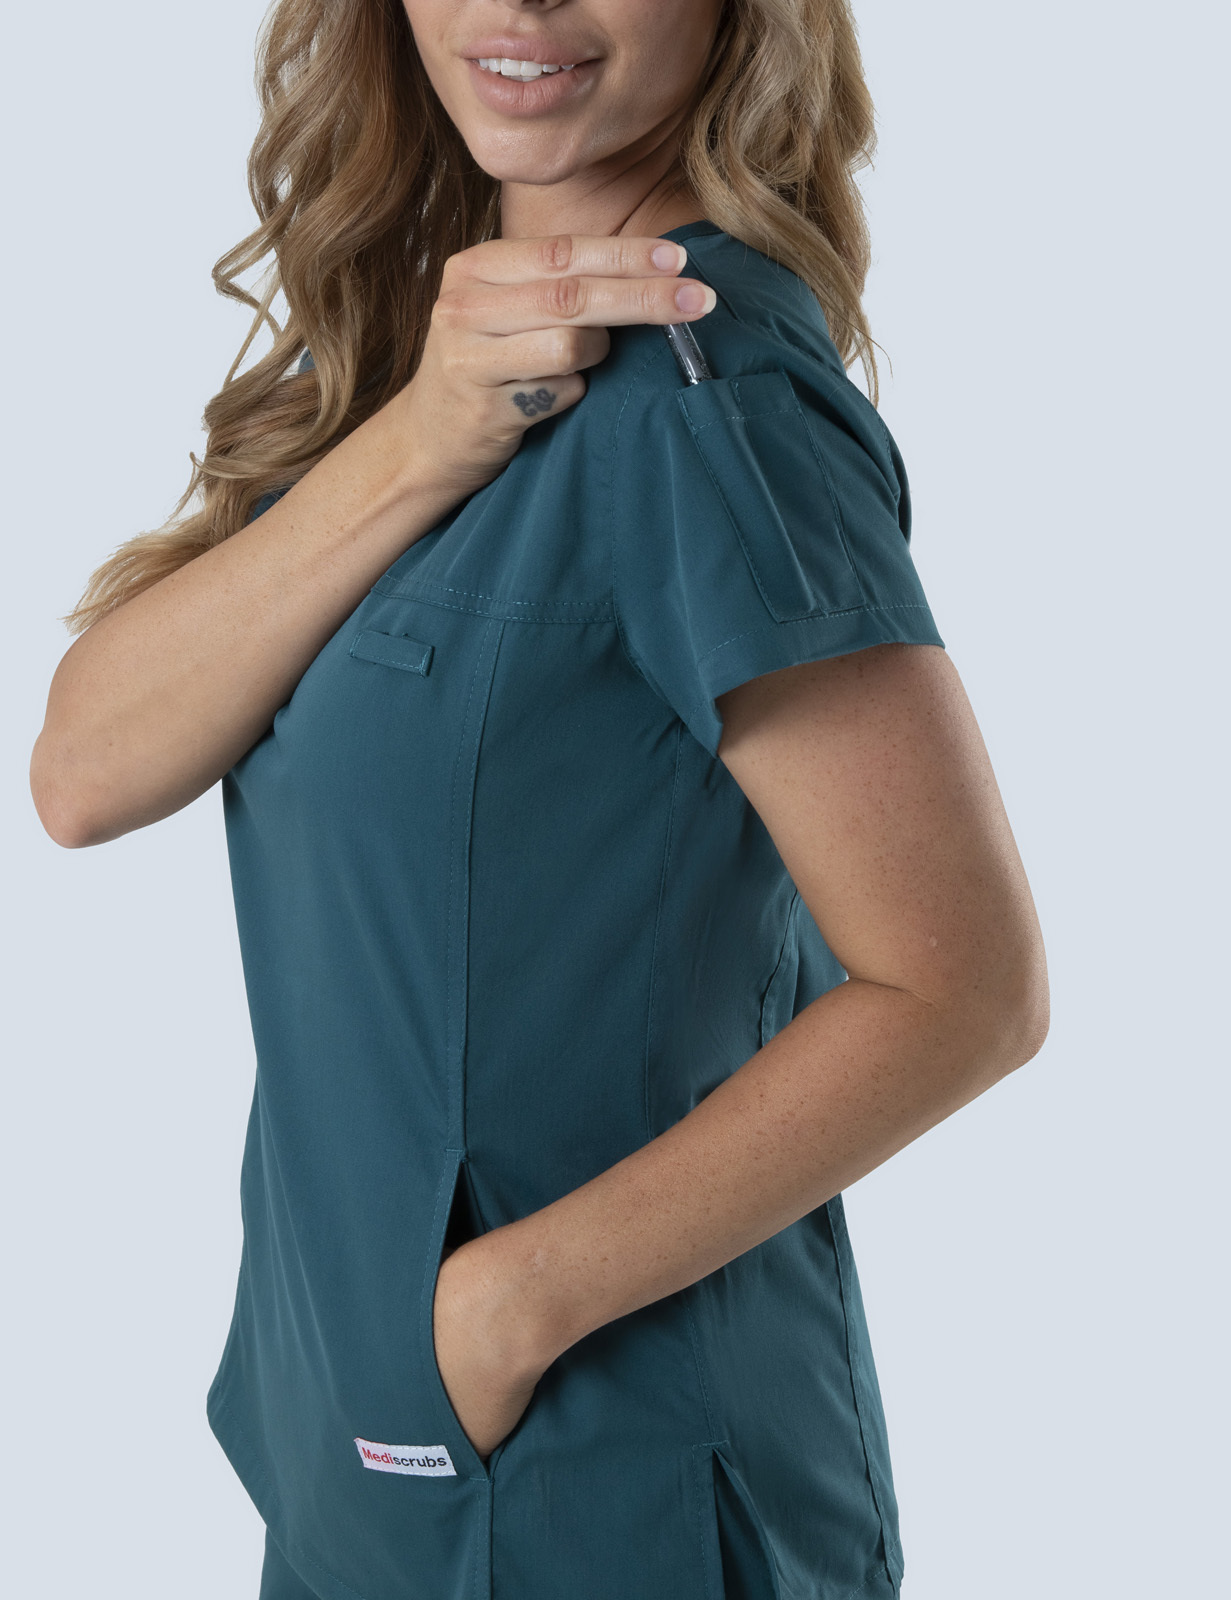 Darling Downs Renal Unit (Women's Fit Solid Scrub Top and Cargo Pants in Caribbean incl Logos)